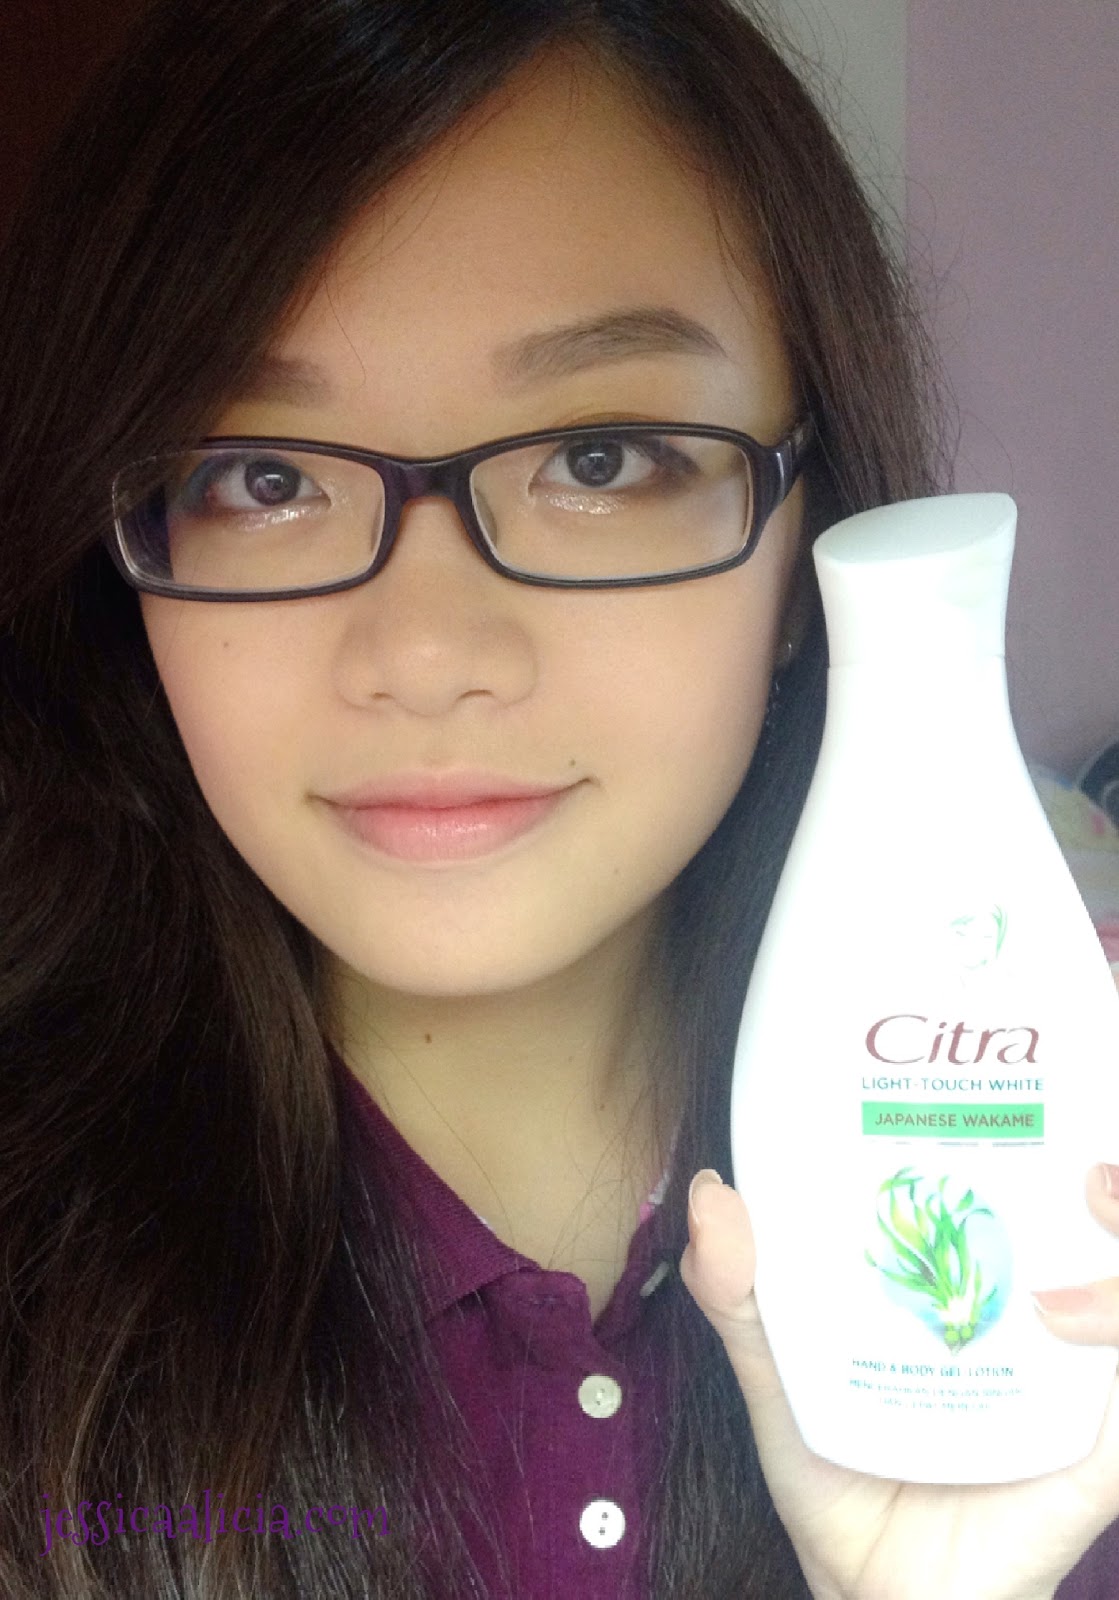 Review : Citra Light-Touch White Japanese Wakame by Jessica Alicia